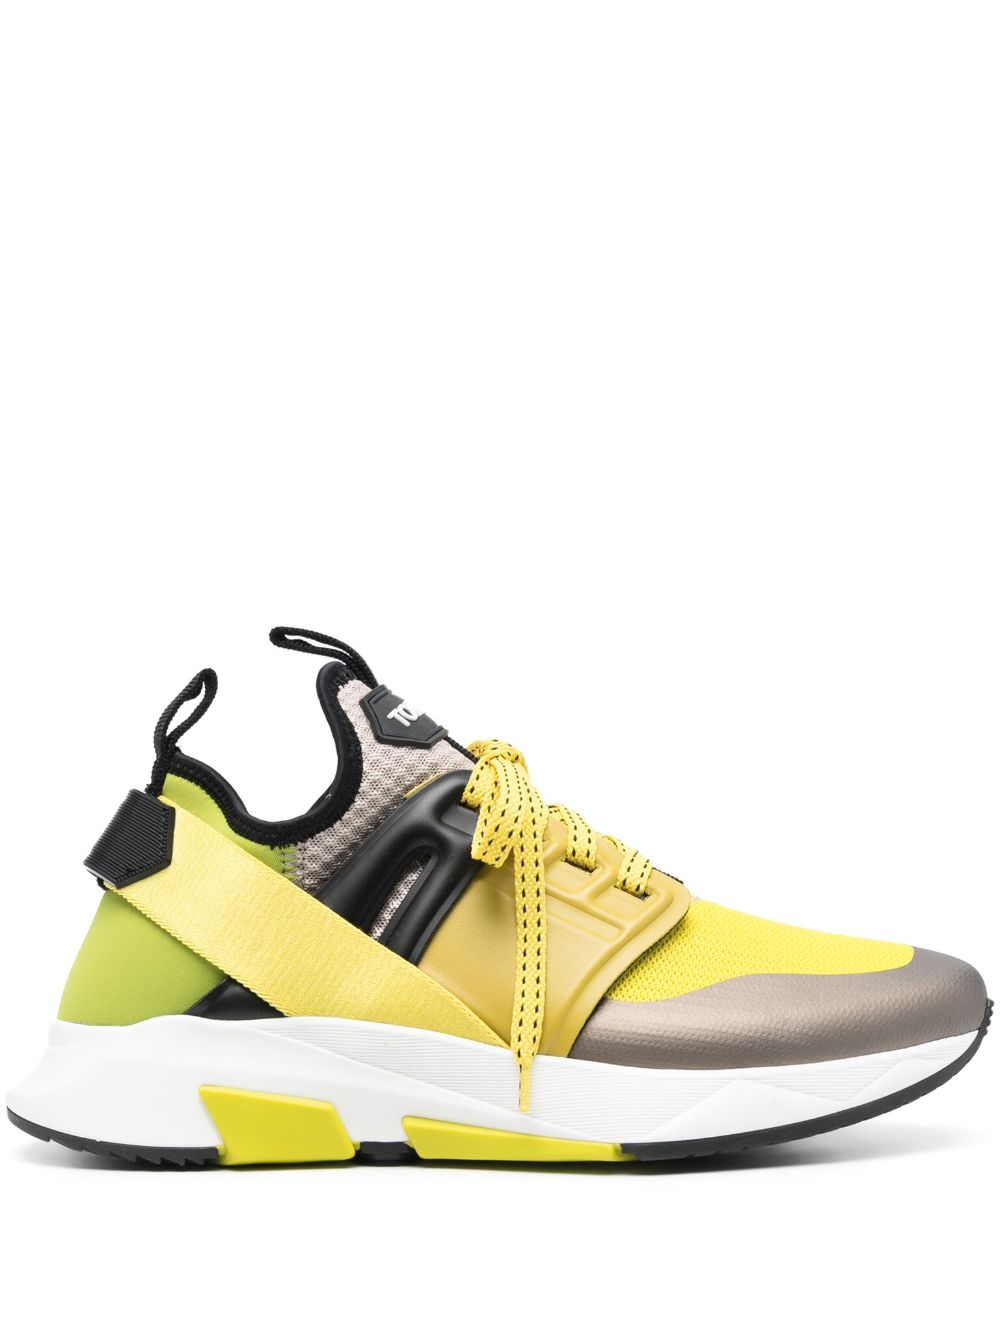 TOM FORD Jago panelled Sneakers - Yellow von TOM FORD